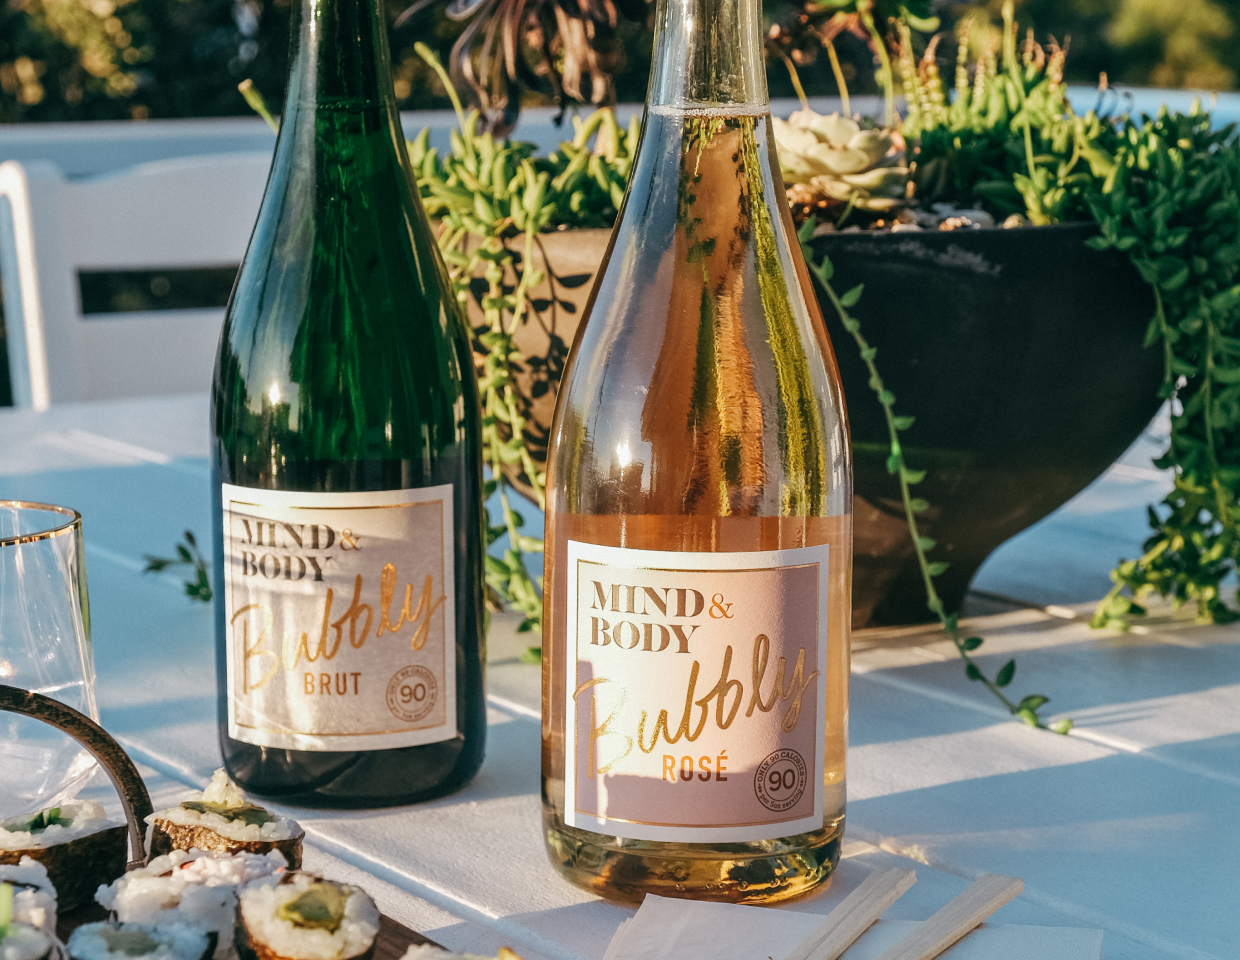 Bottle of Mind & Body bubbly brut and Mind & Body bubbly rose on a table outside next to a plate of sushi and lush green plant.